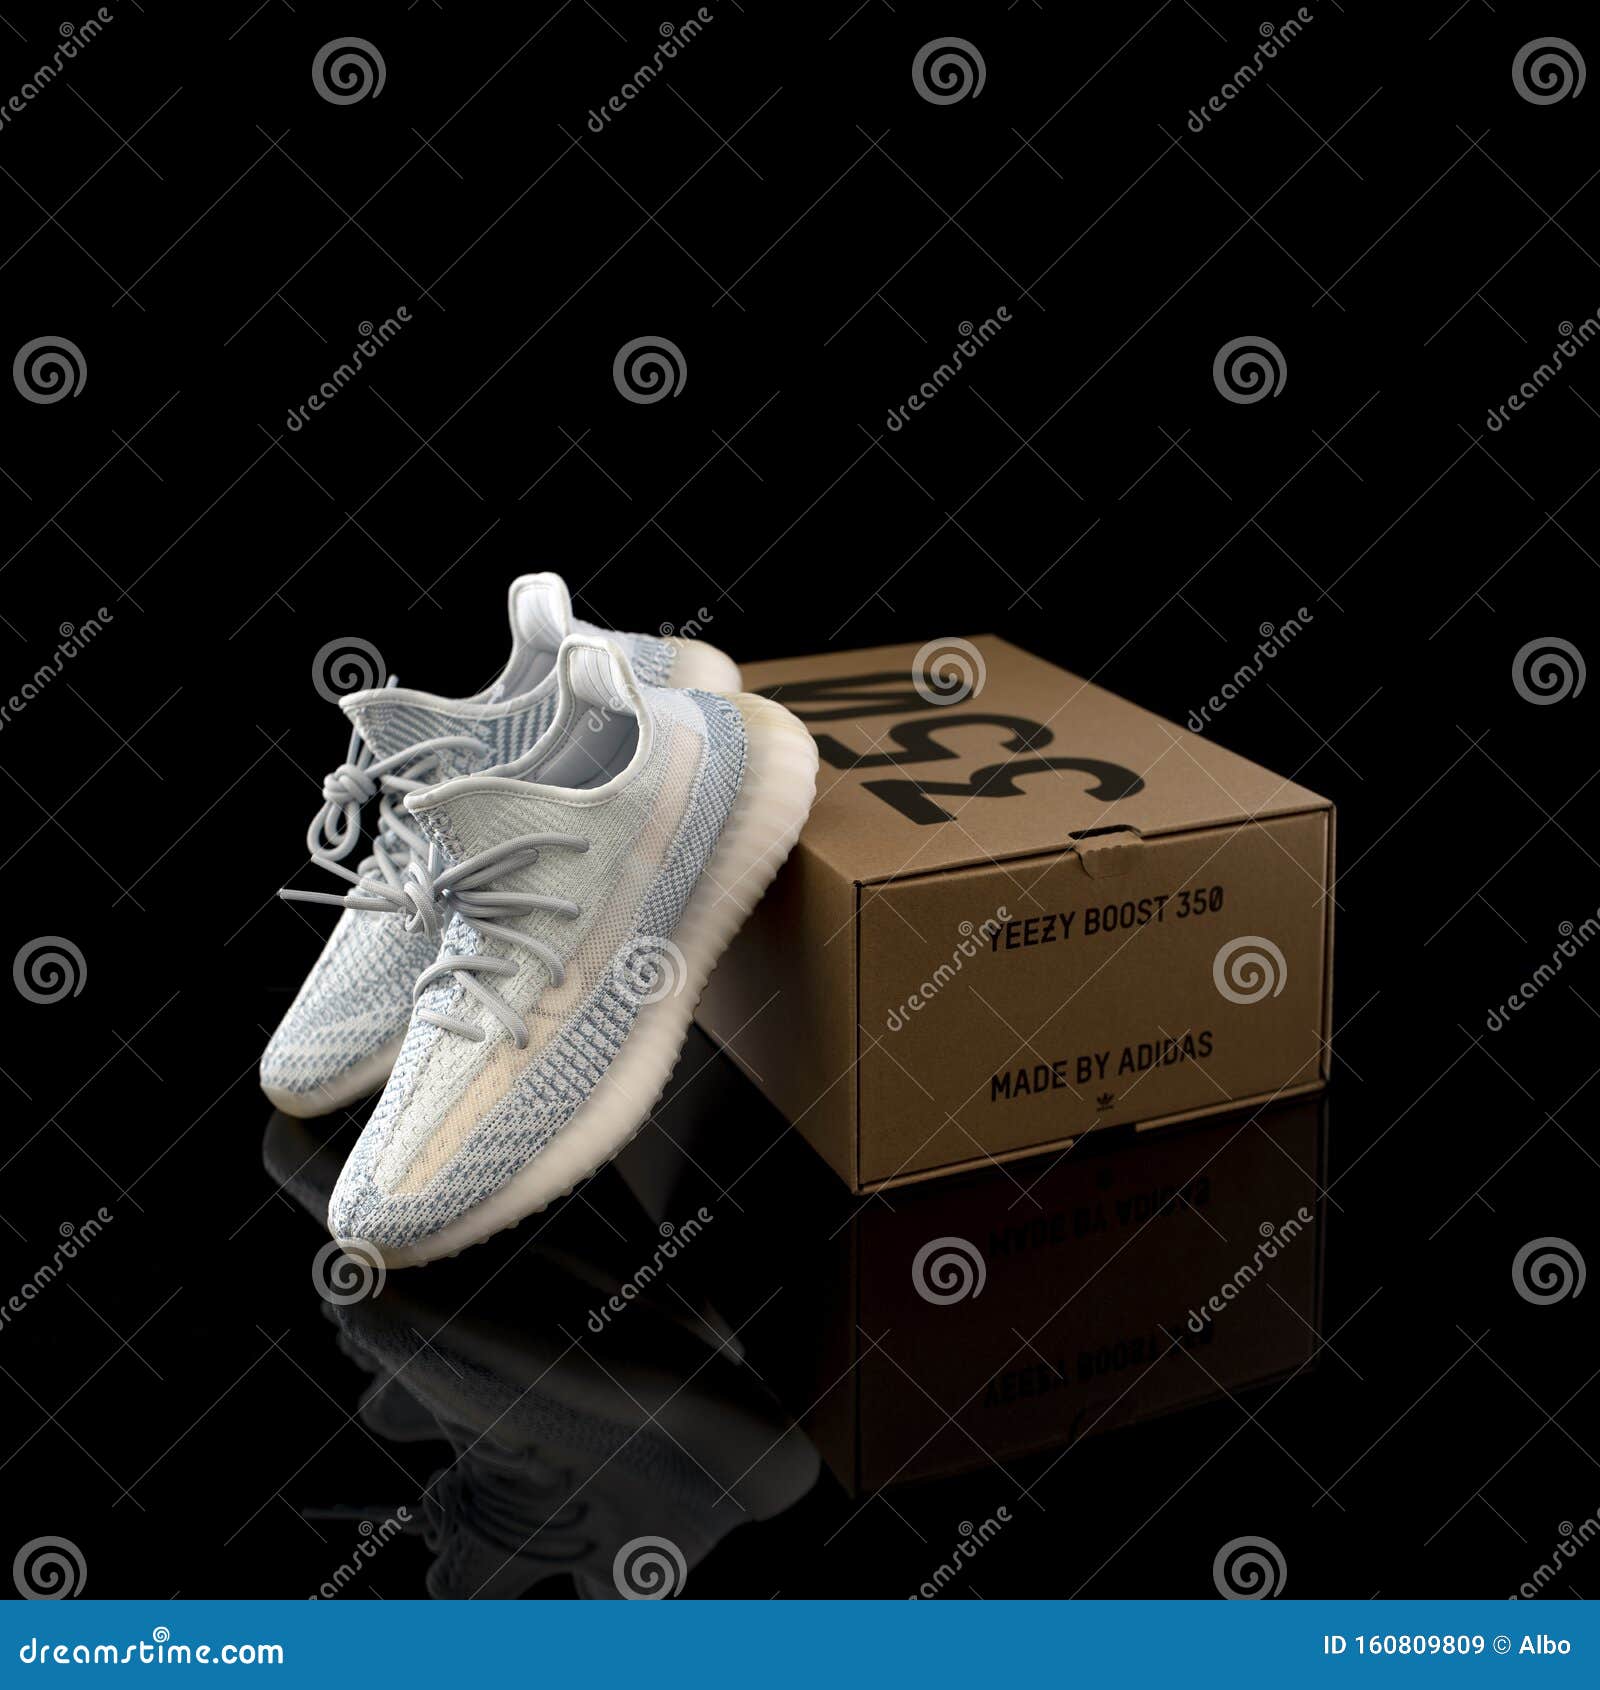 Adidas Yeezy Boost 350 V2 Cloud White Non Reflective Shoes Studio